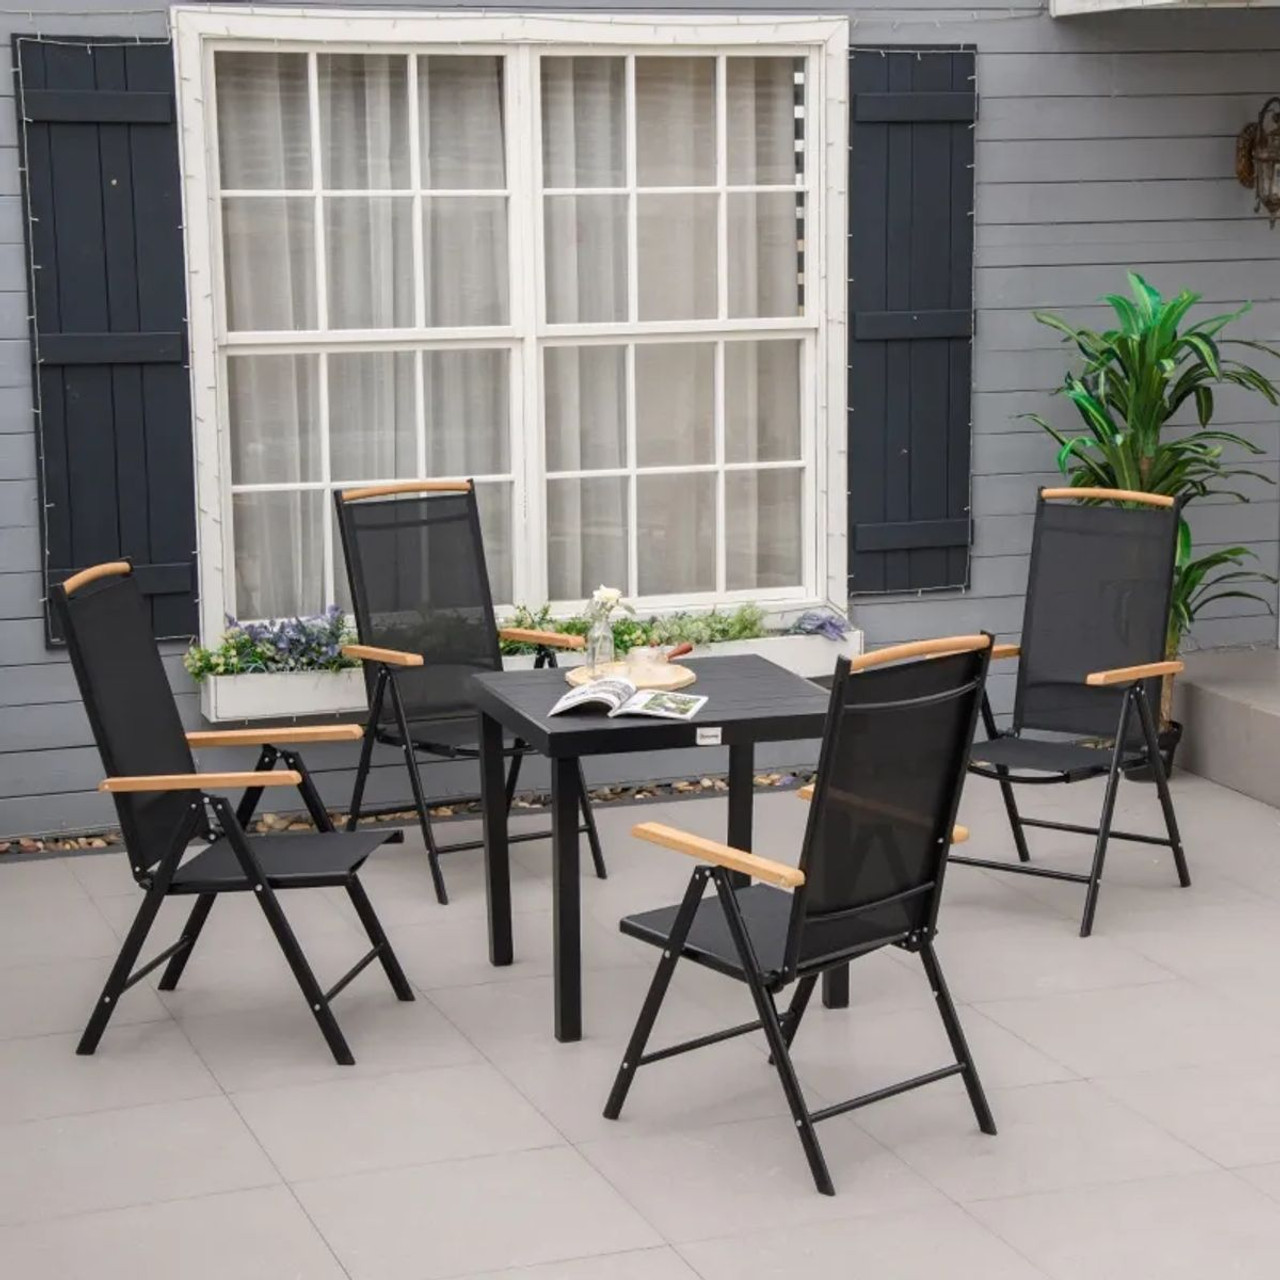 Outsunny® 5-Piece Outdoor Patio Dining Set with Reclining Folding Chairs product image